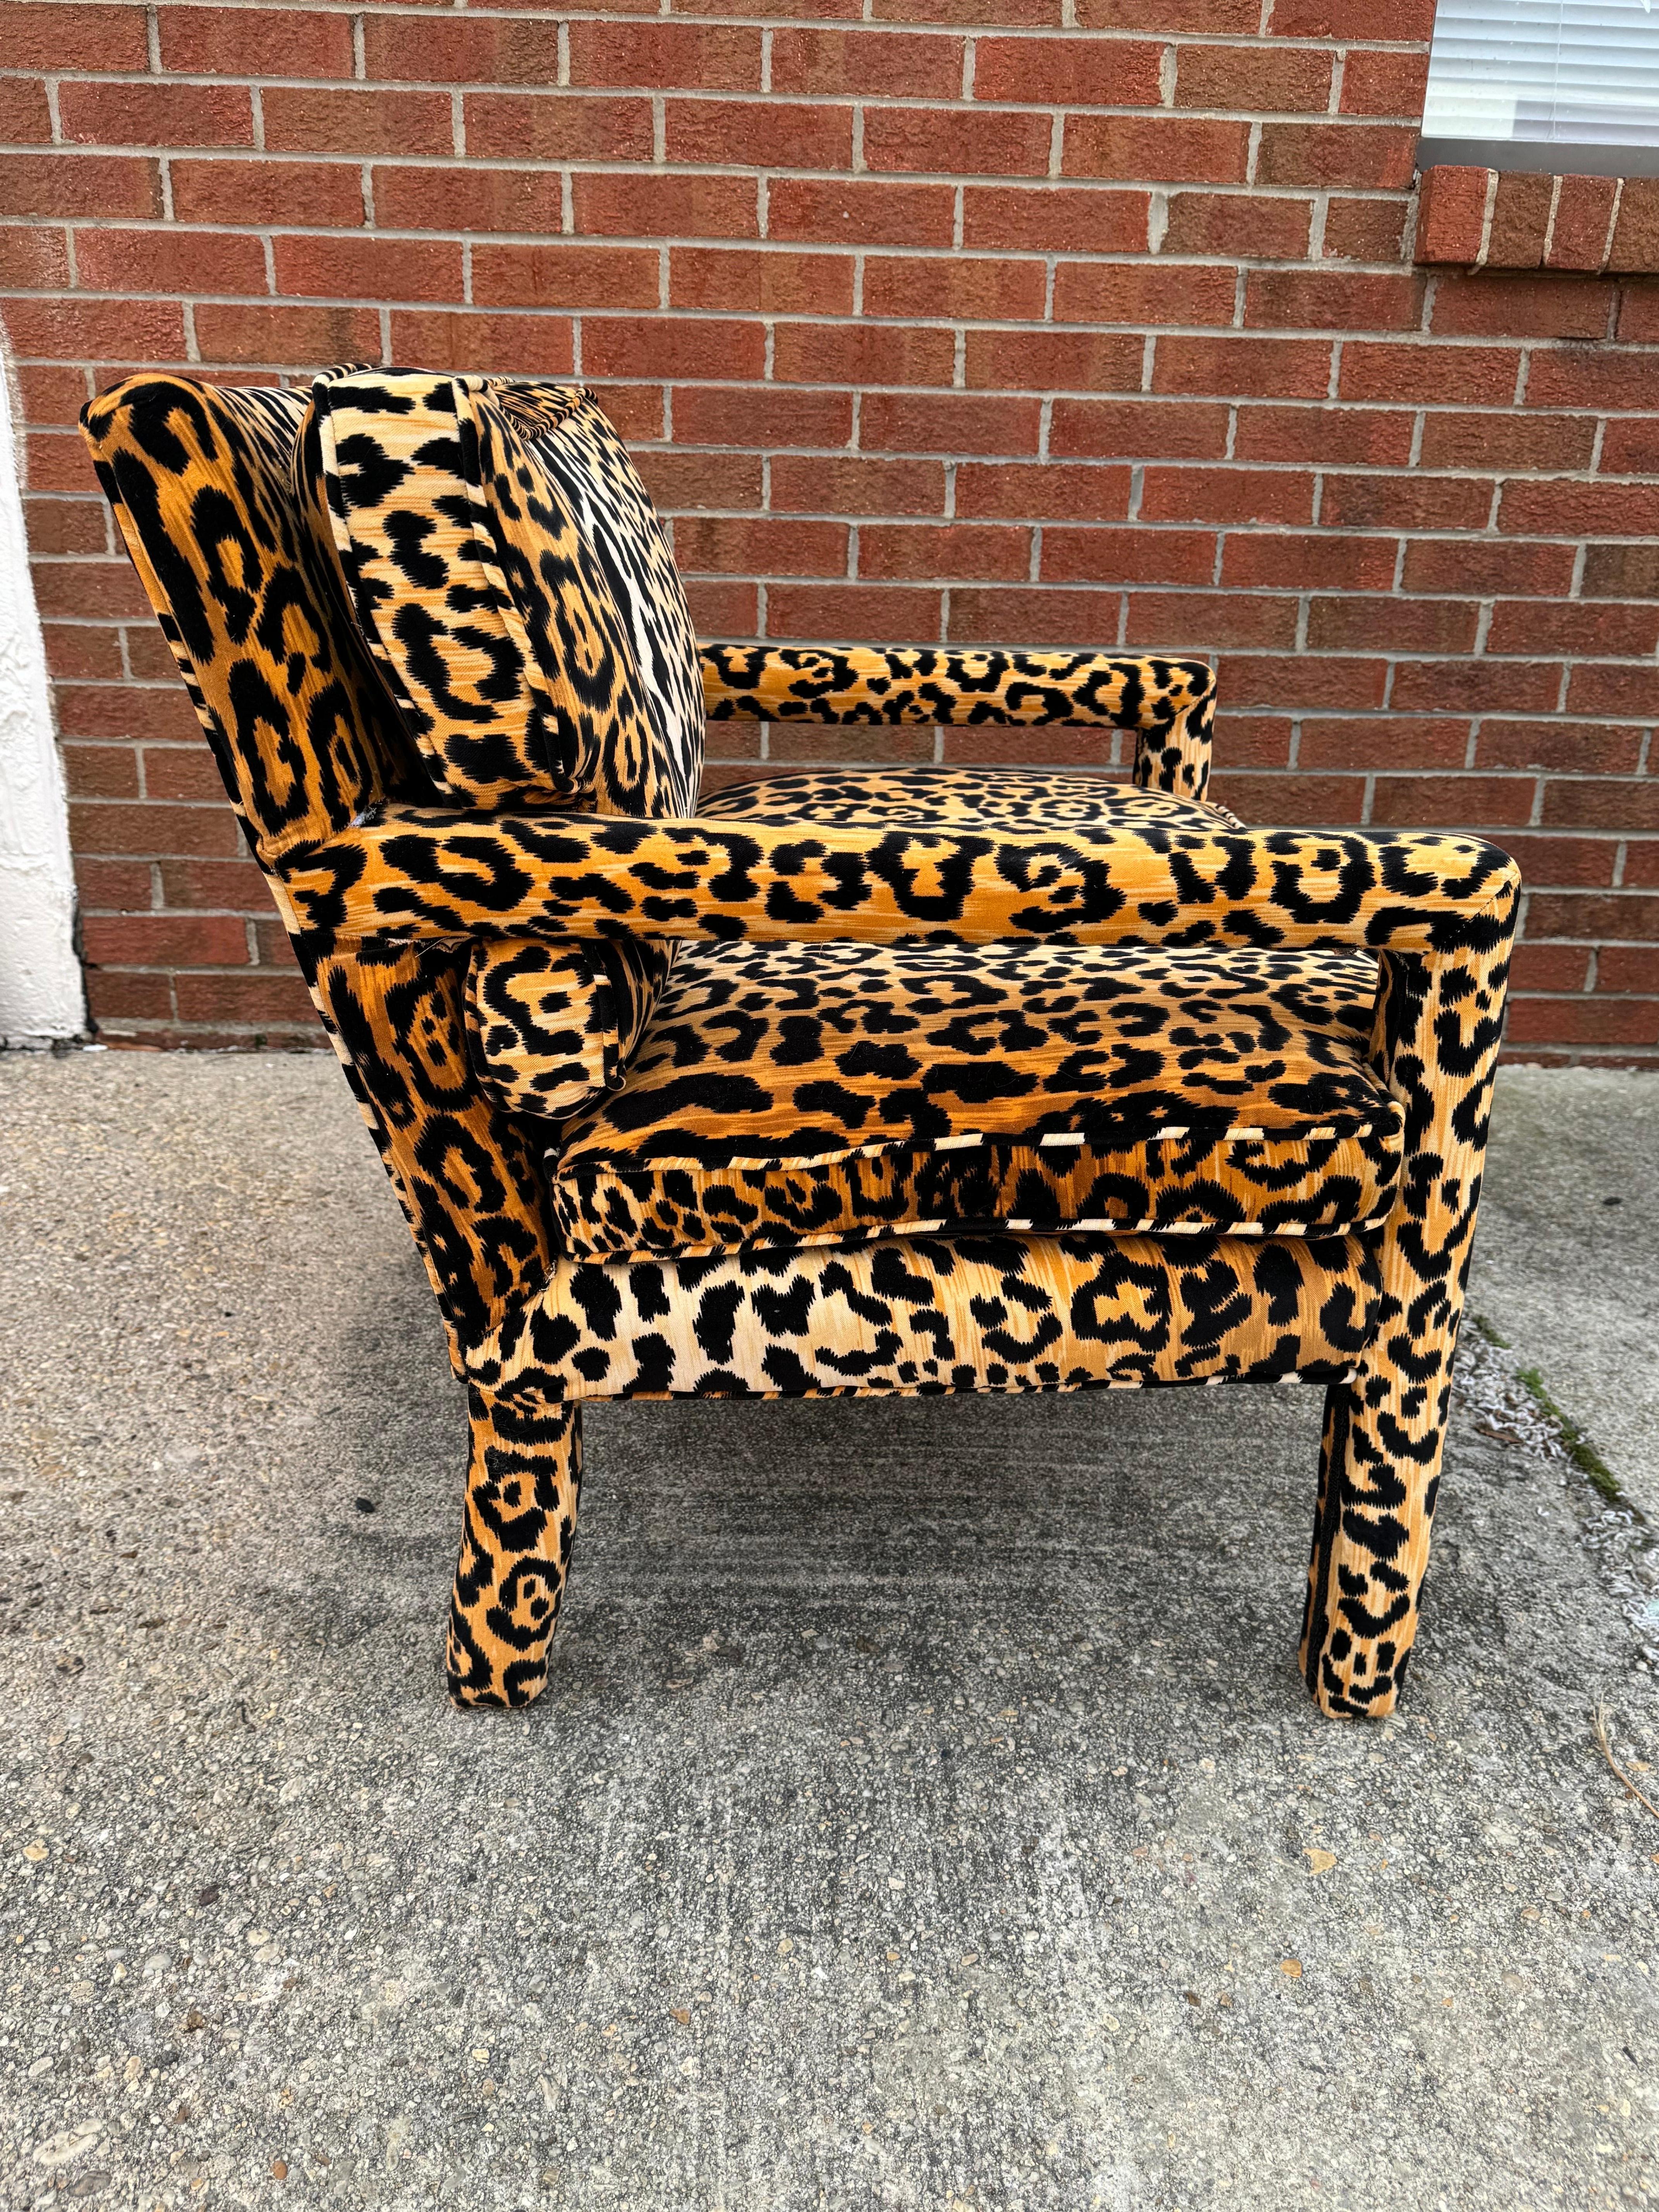 Modern version of the timeless Milo Baughman Parsons style chair  with forever sexy and stylish leopard upholstery . Parsons chairs are unique in that every surface is upholstered - every inch of this arm chair is padded and covered in spots. The